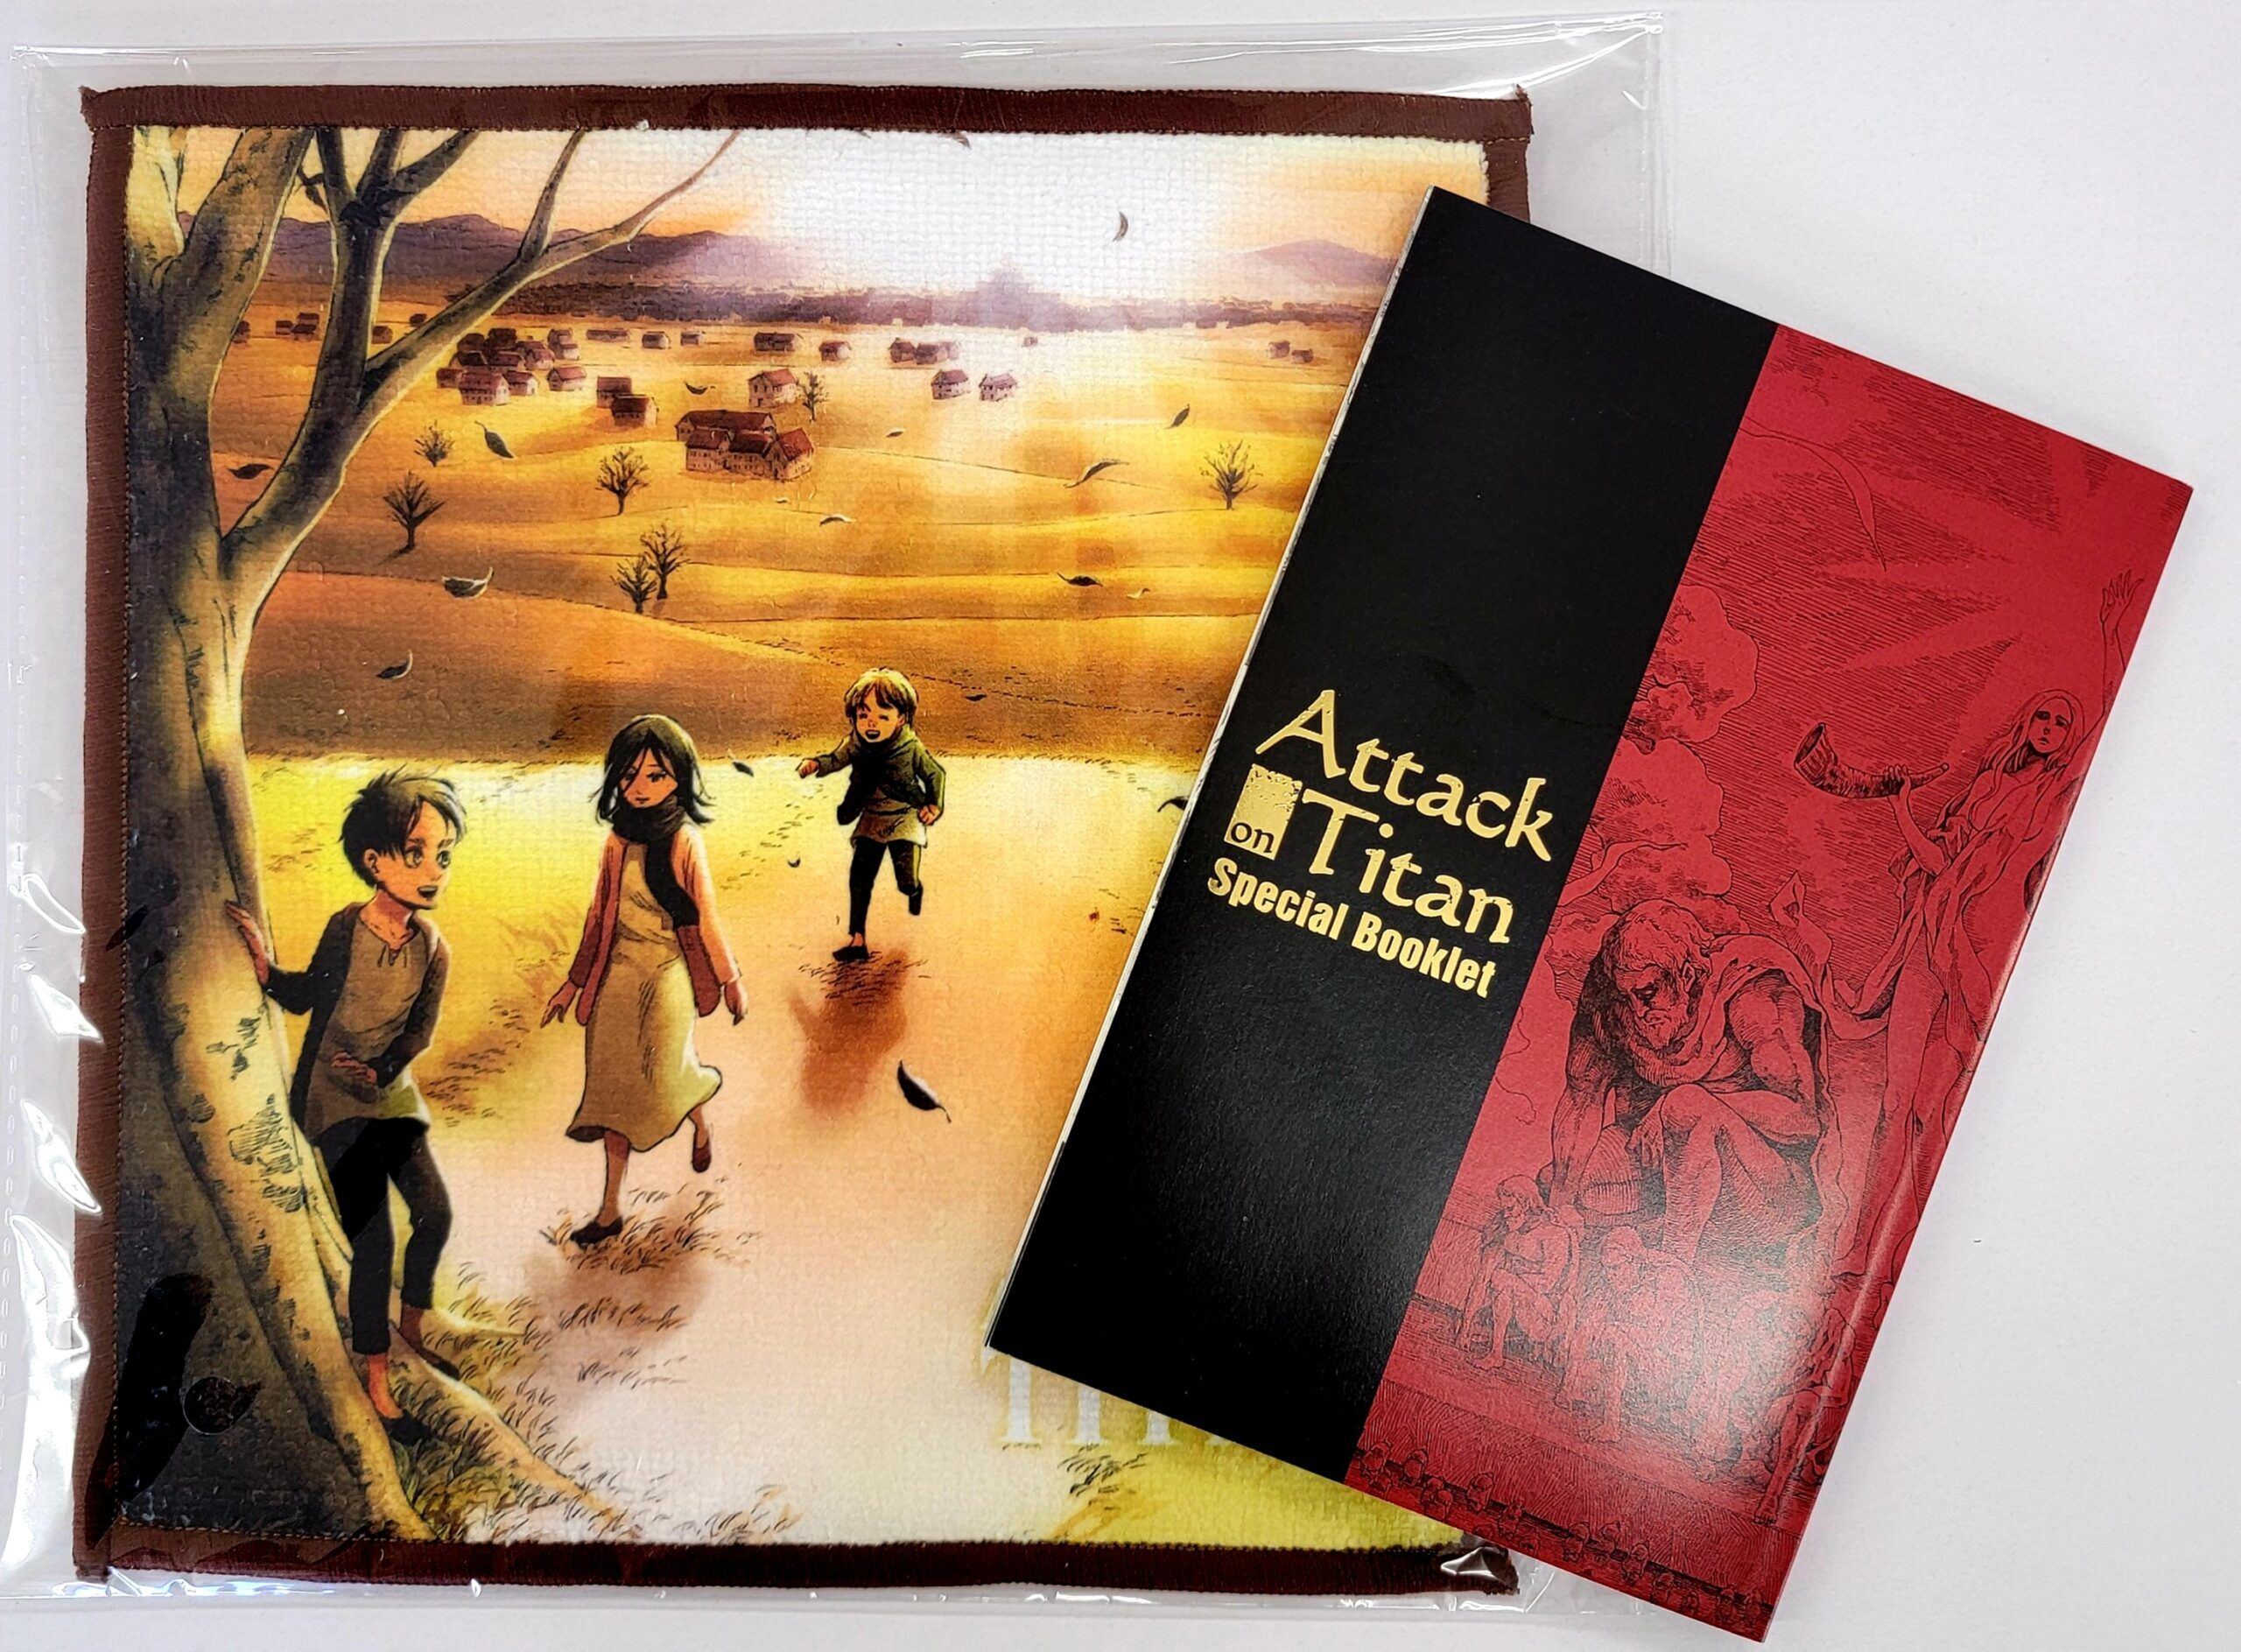 (JAPAN EXCLUSIVE) ATTACK ON TITAN ULTRA COLLECTOR SET (2pcs)